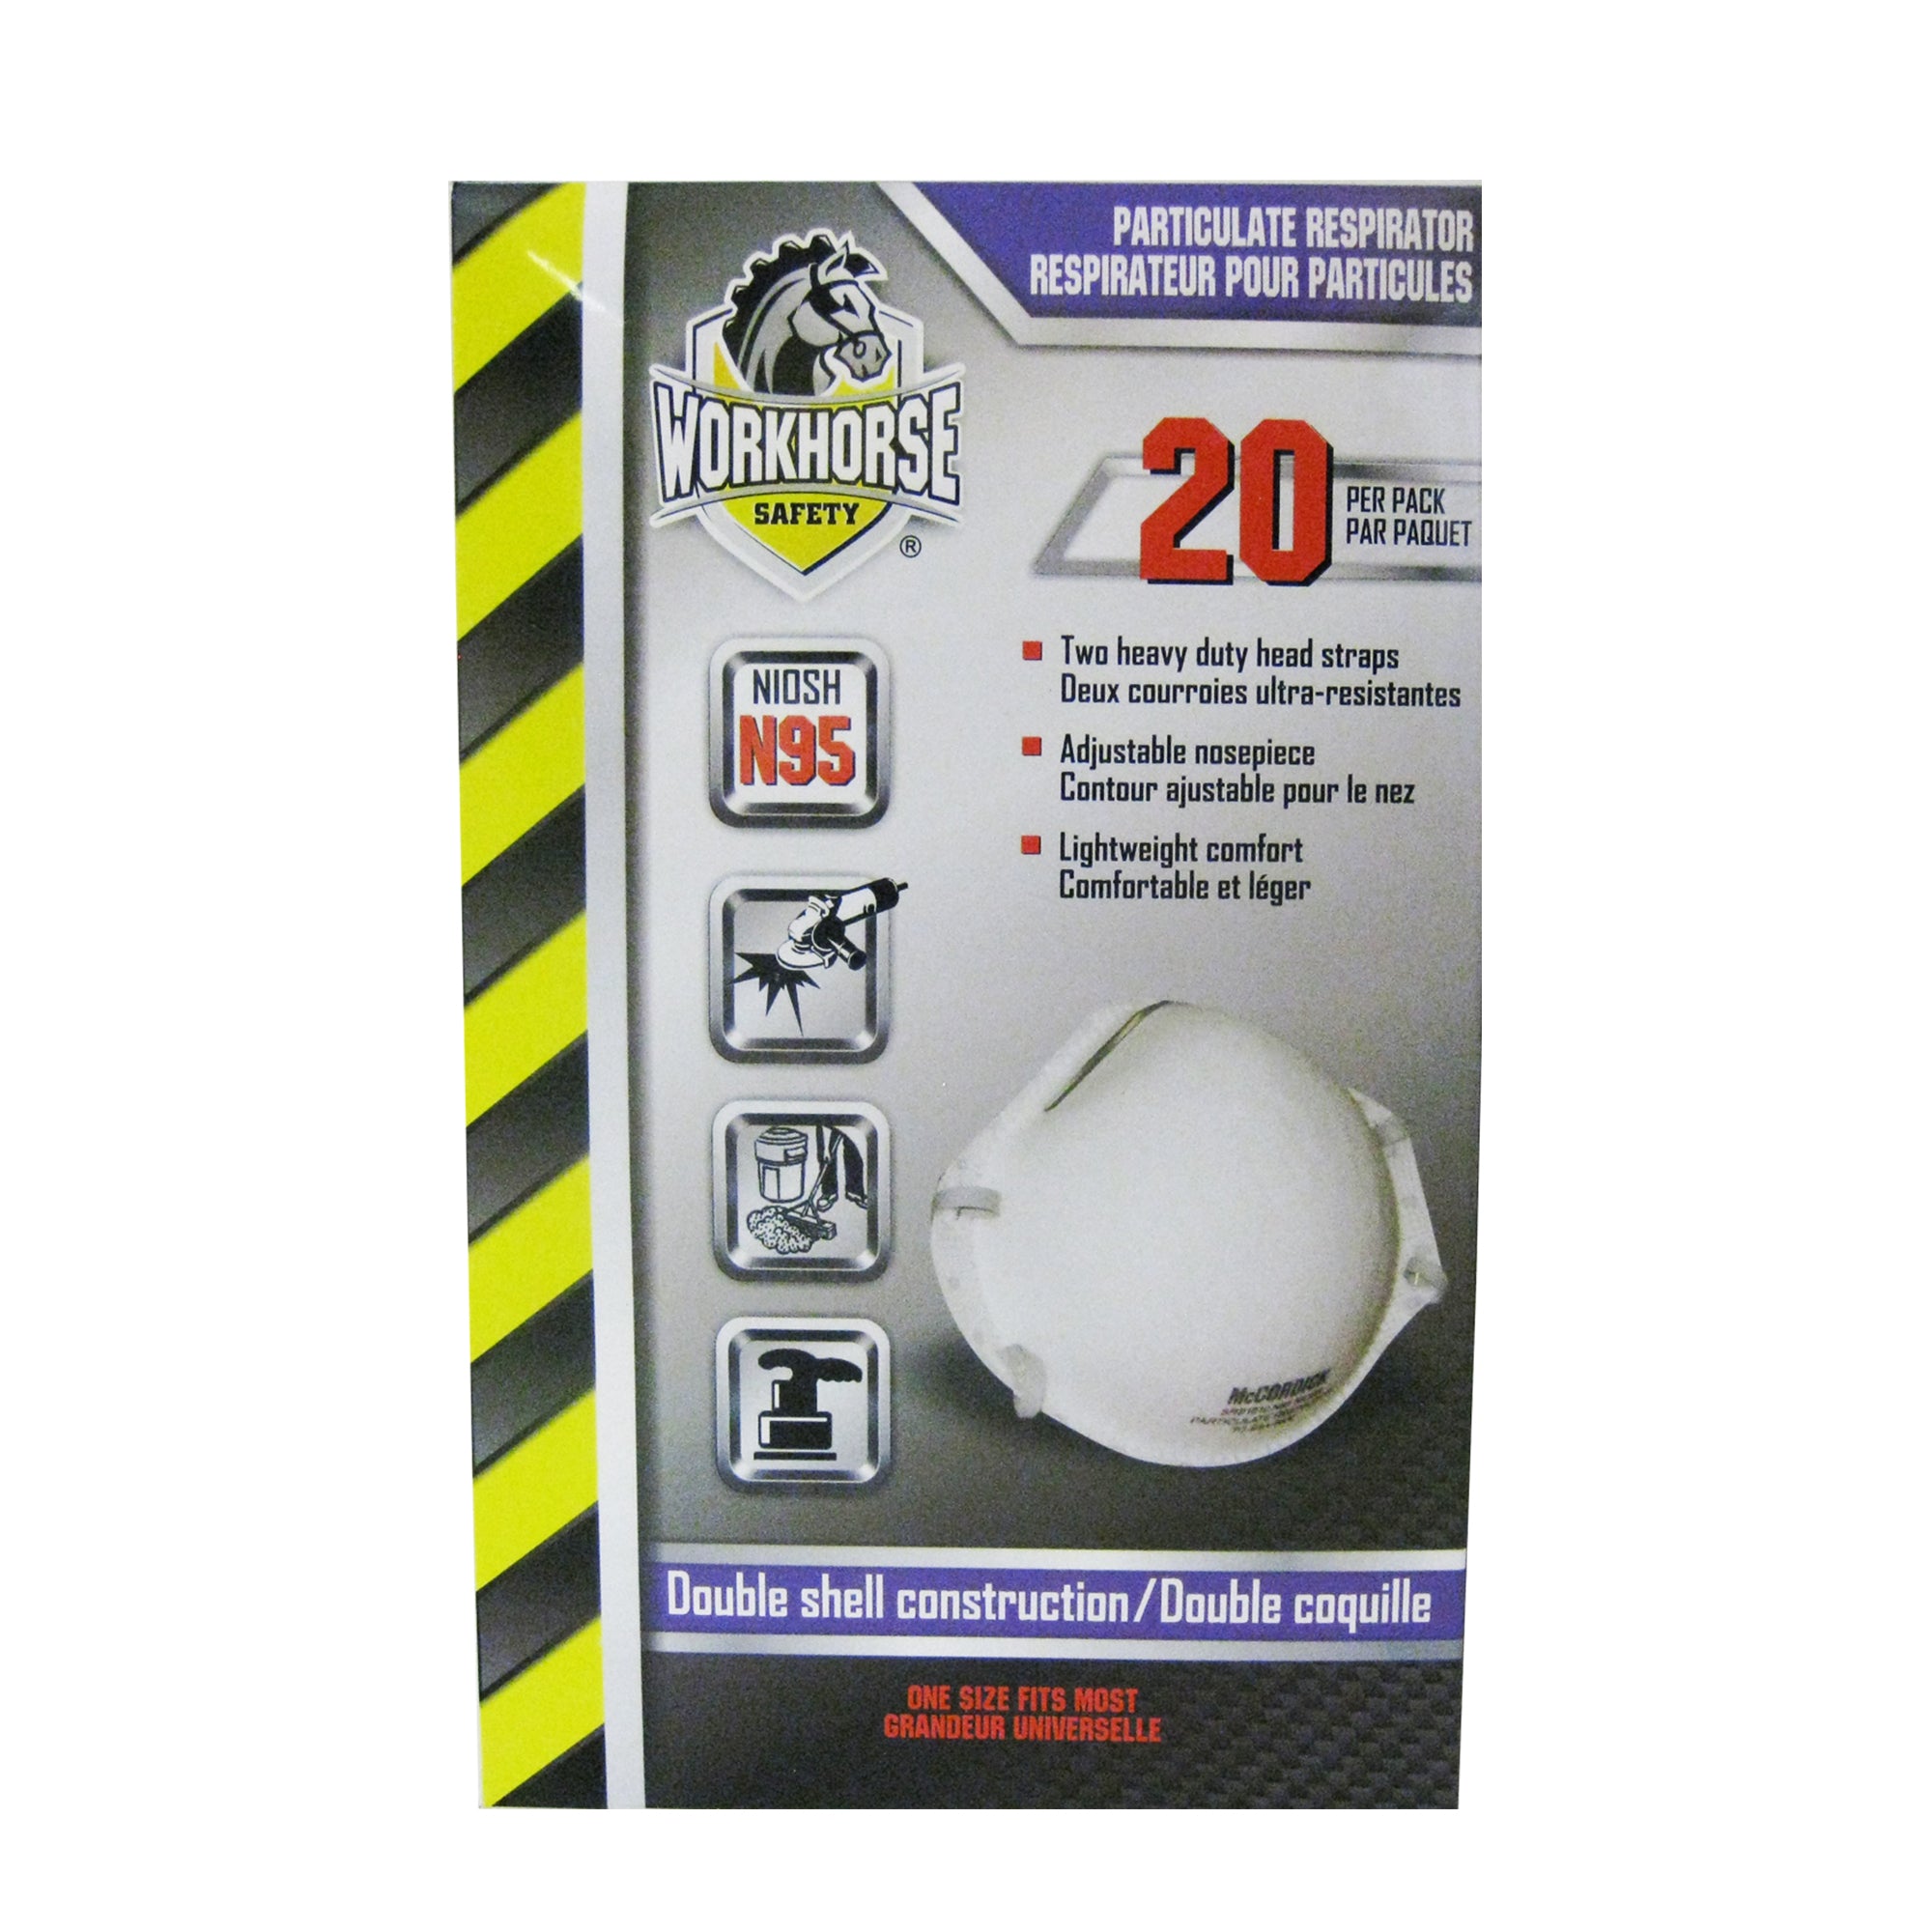 WORKHORSE® N95 Disposable Particulate Respirator, White, 20/Box